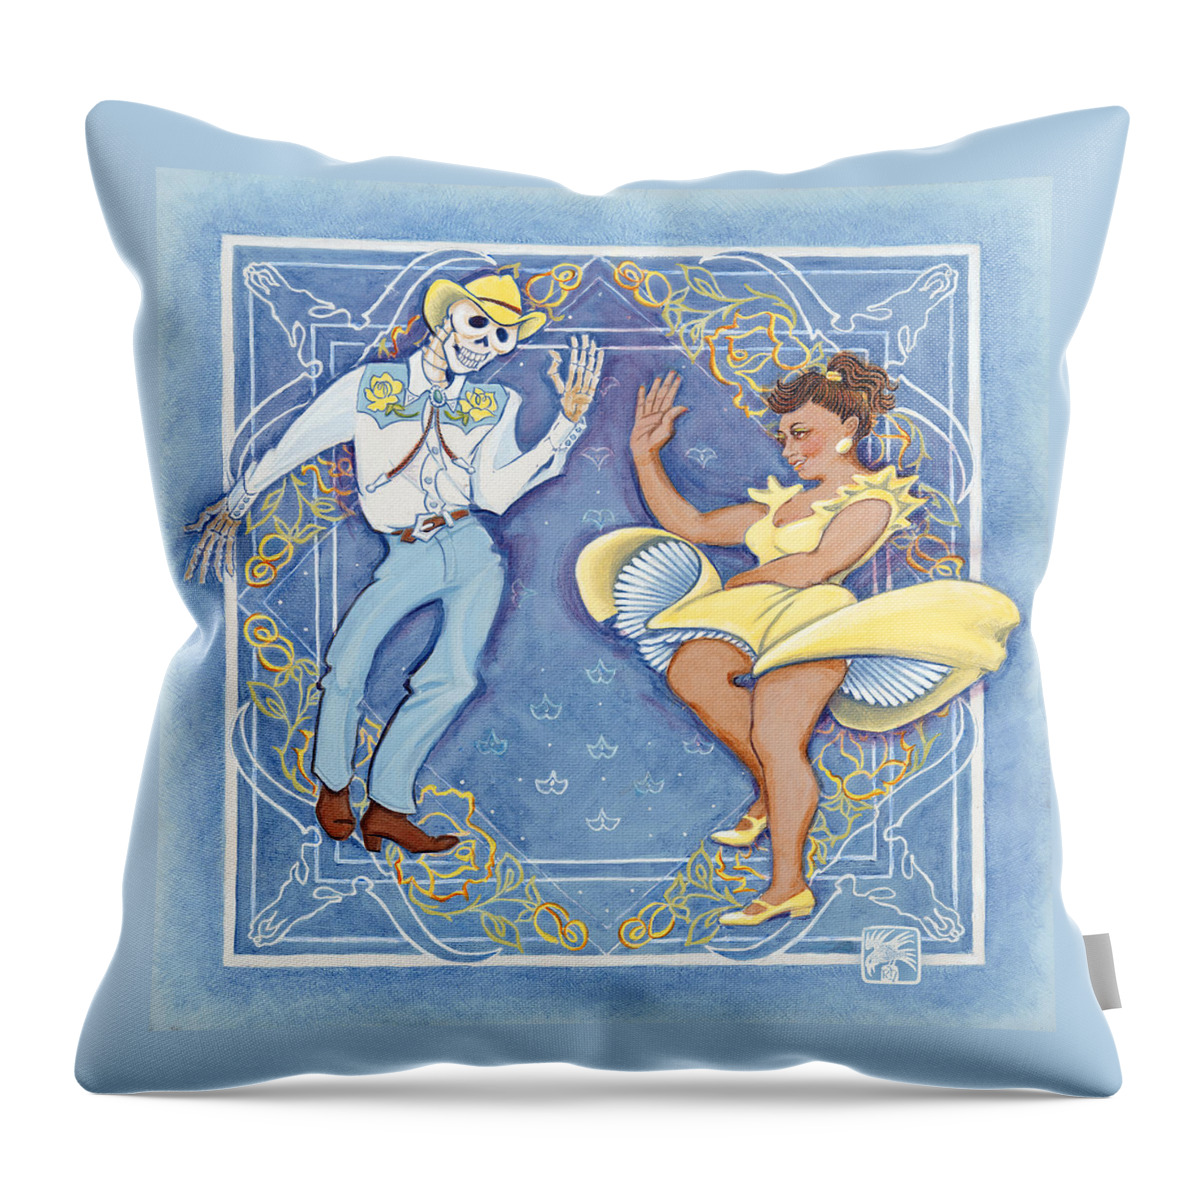 Betterlight Throw Pillow featuring the painting Square Dance by Ruth Hooper